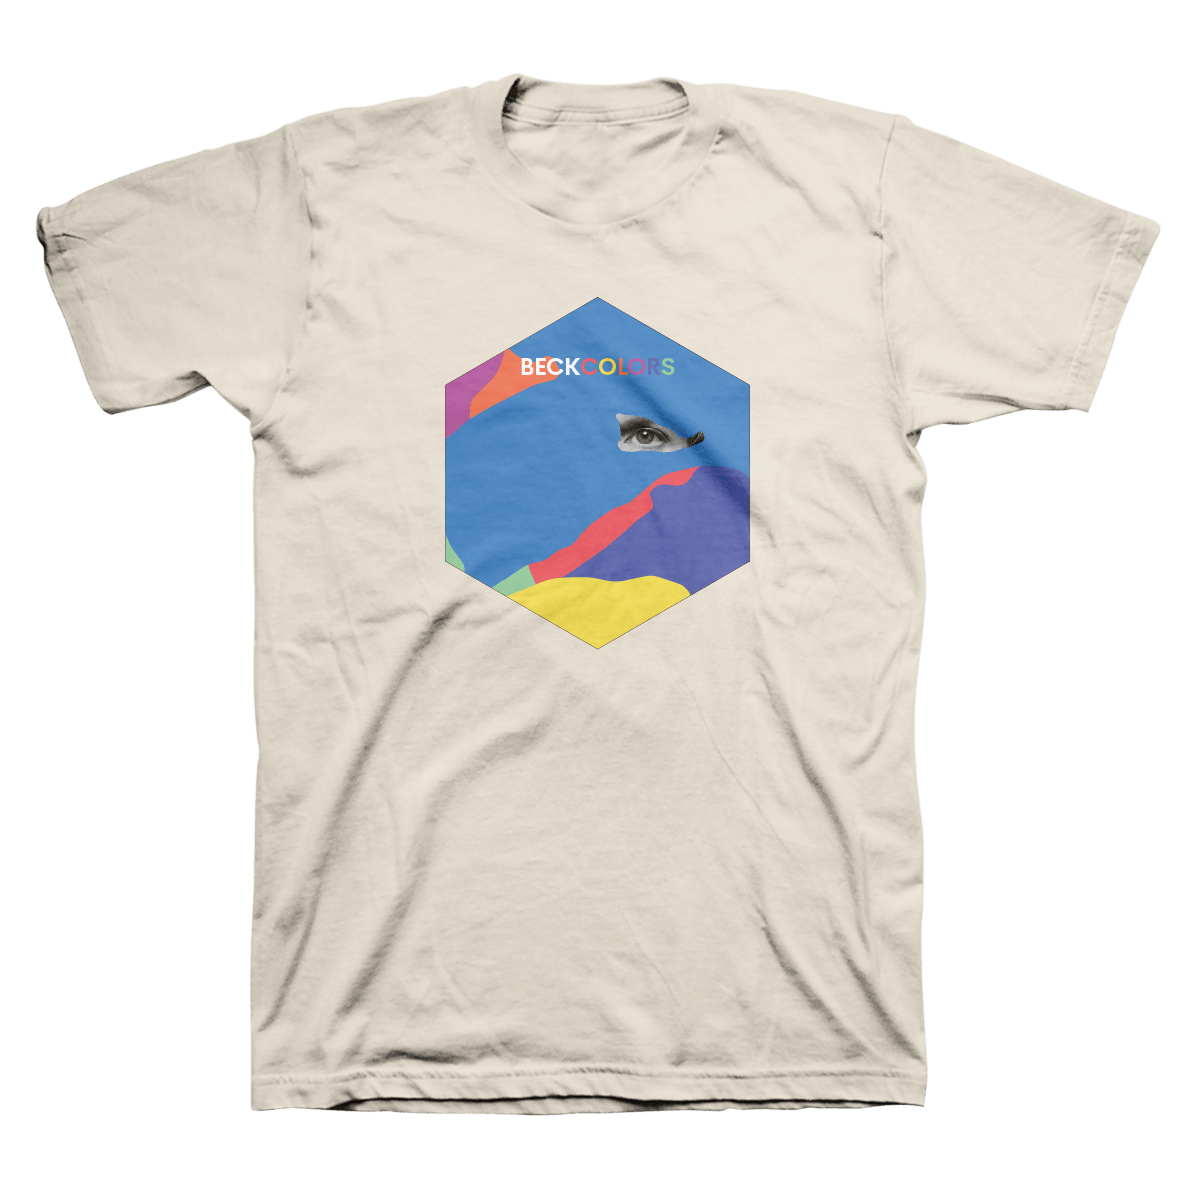 Colors Tee - Beck